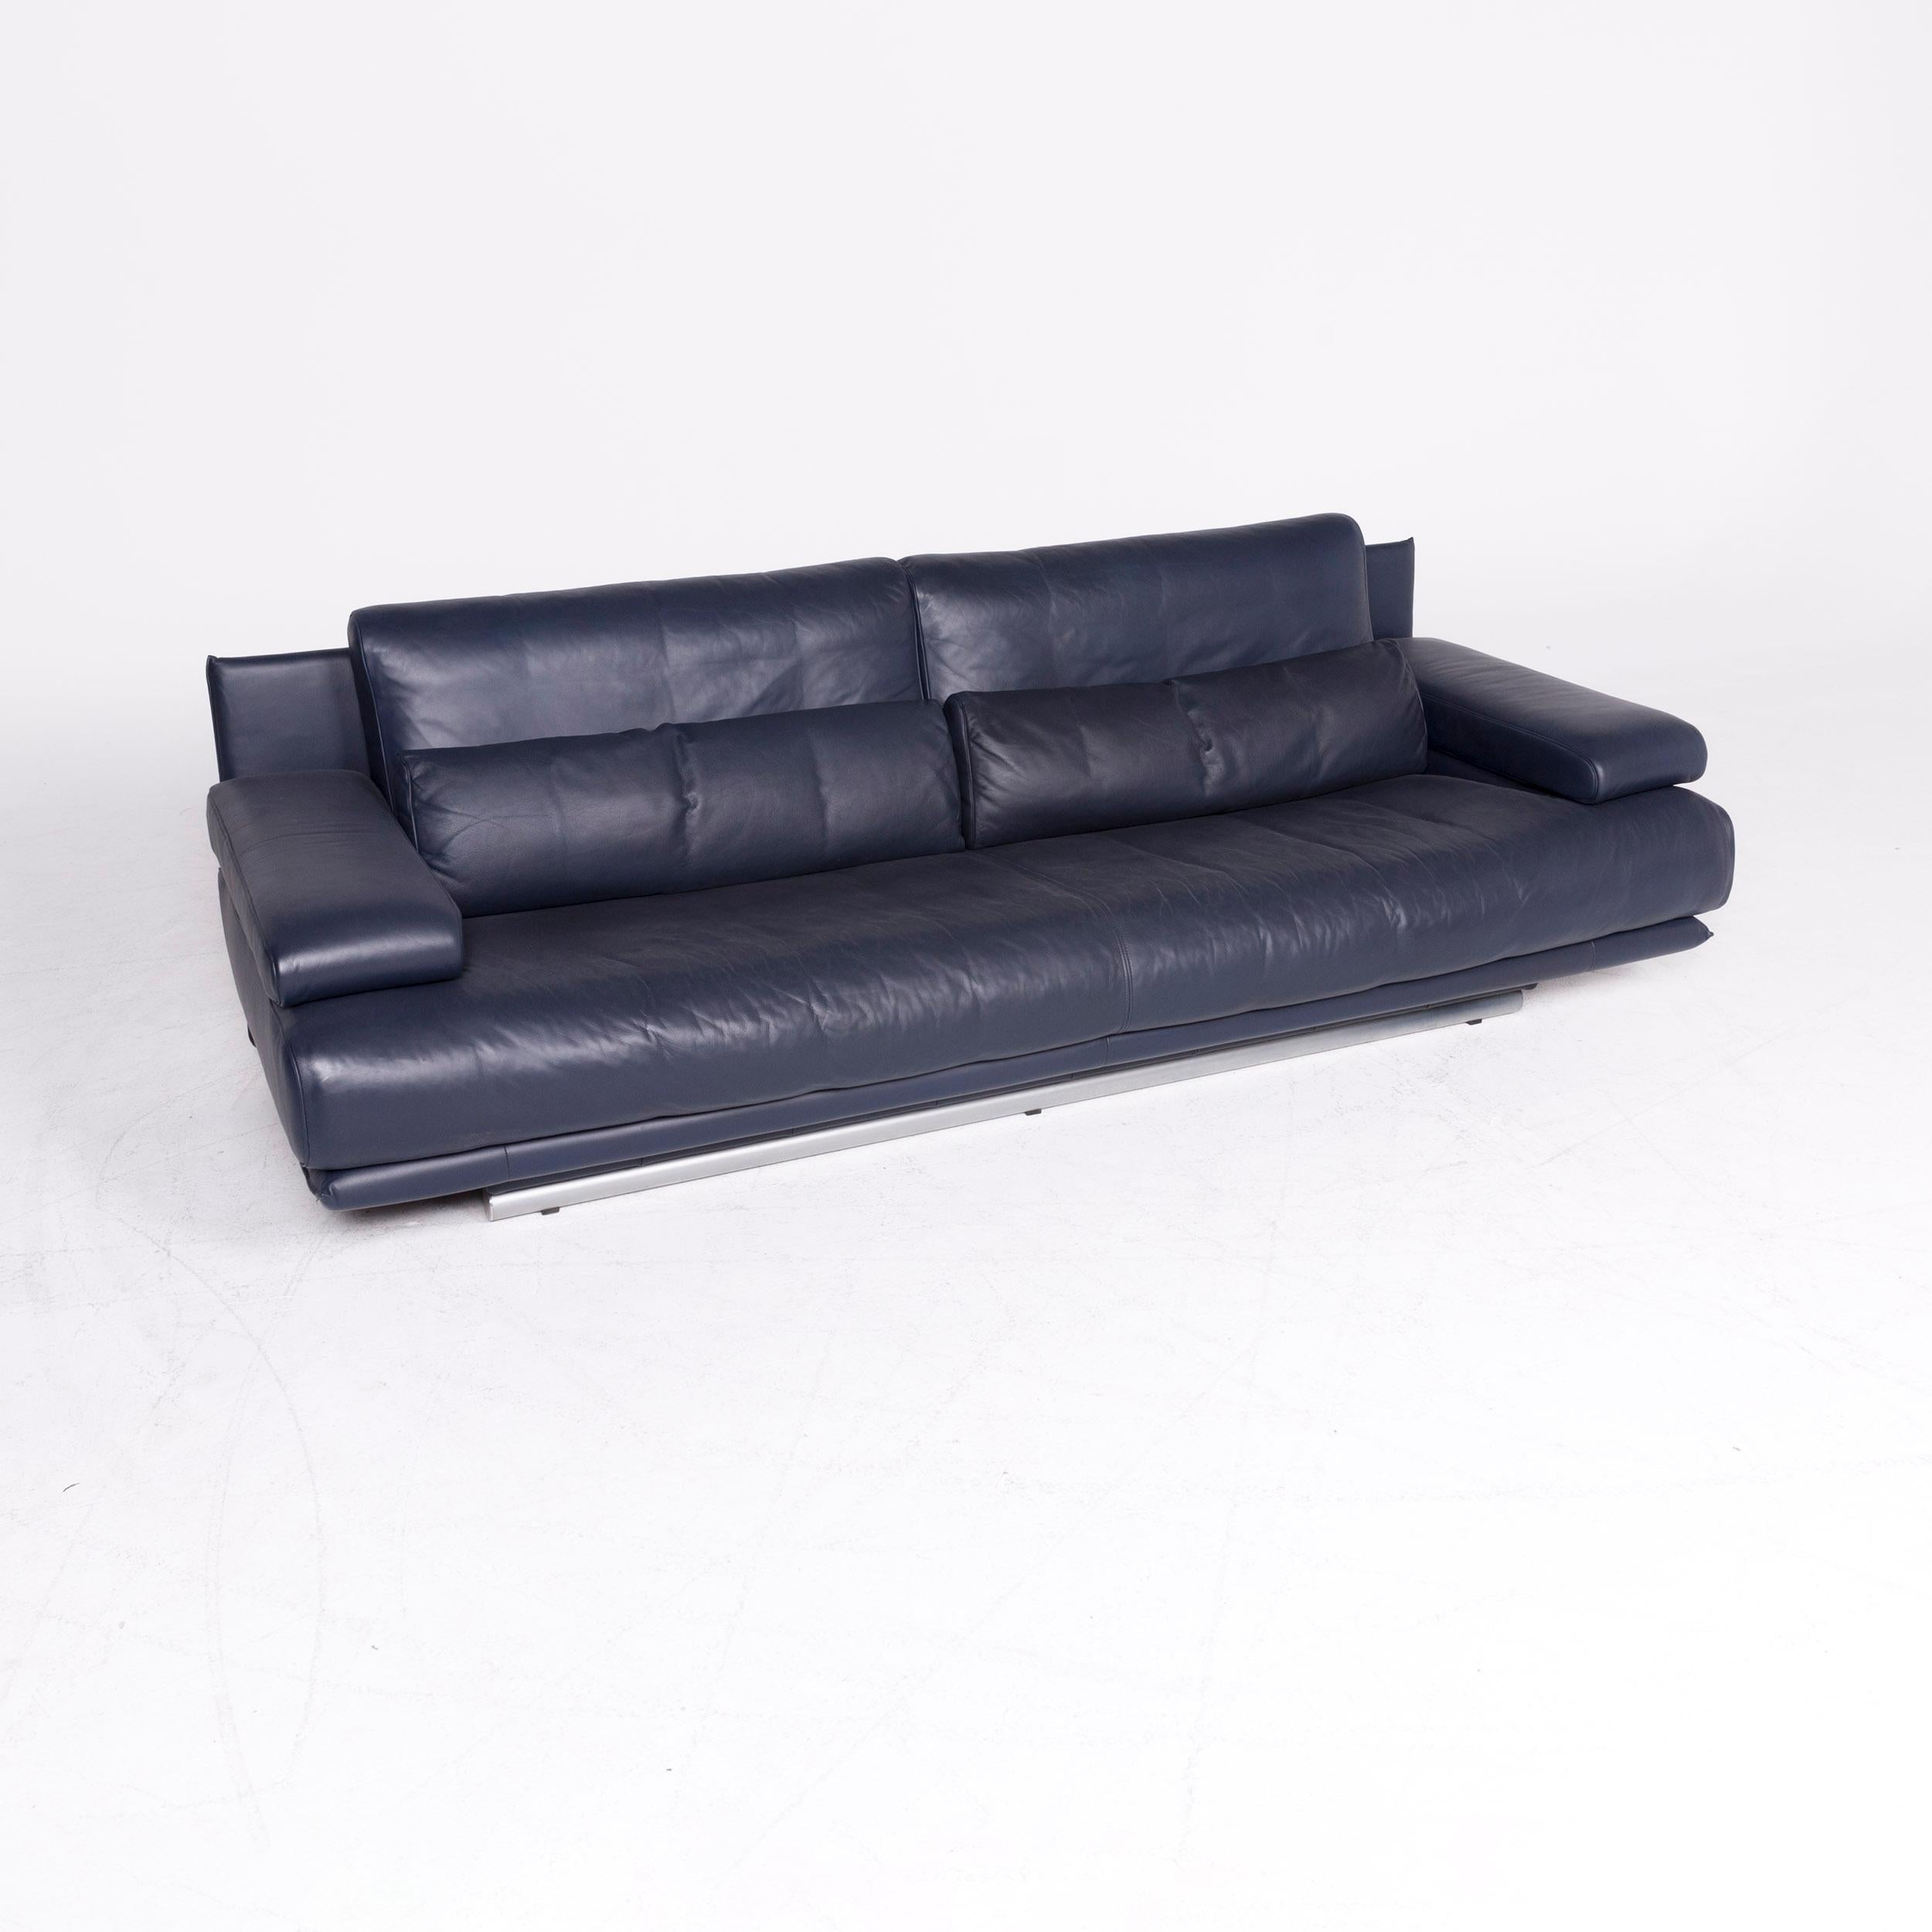 We bring to you a Rolf Benz 6500 designer leather Sofa blue genuine leather three-seat couch.

Product measurements in centimeters:

Depth 96
Width 226
Height 76
Seat-height 38
Rest-height 51
Seat-depth 60
Seat-width 177
Back-height